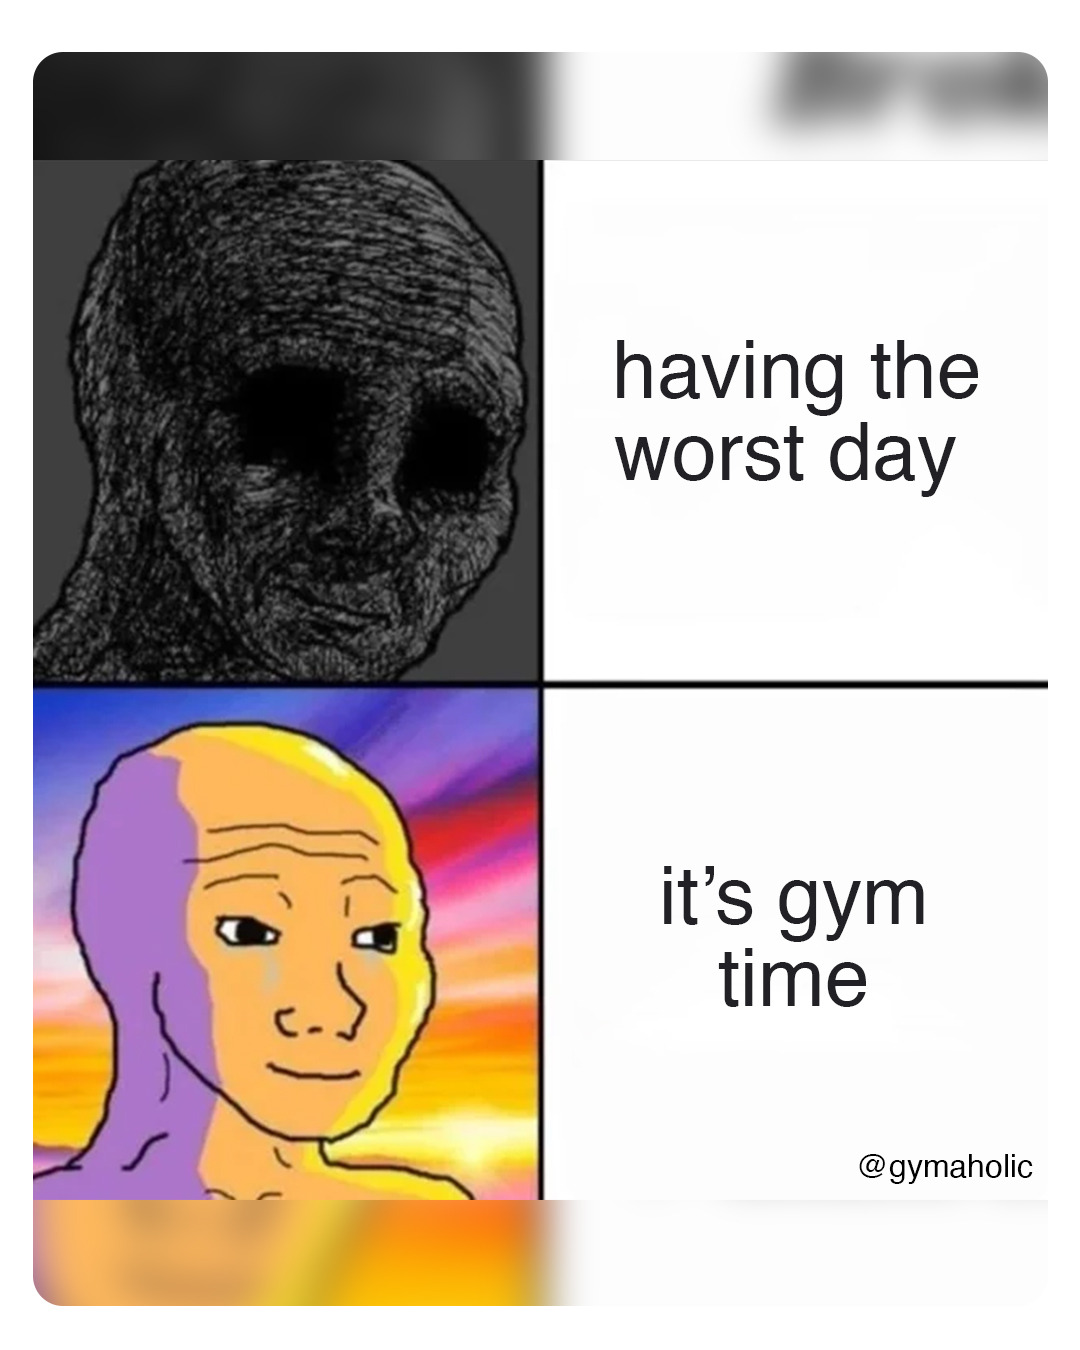 Having the worst day vs. it’s gym time